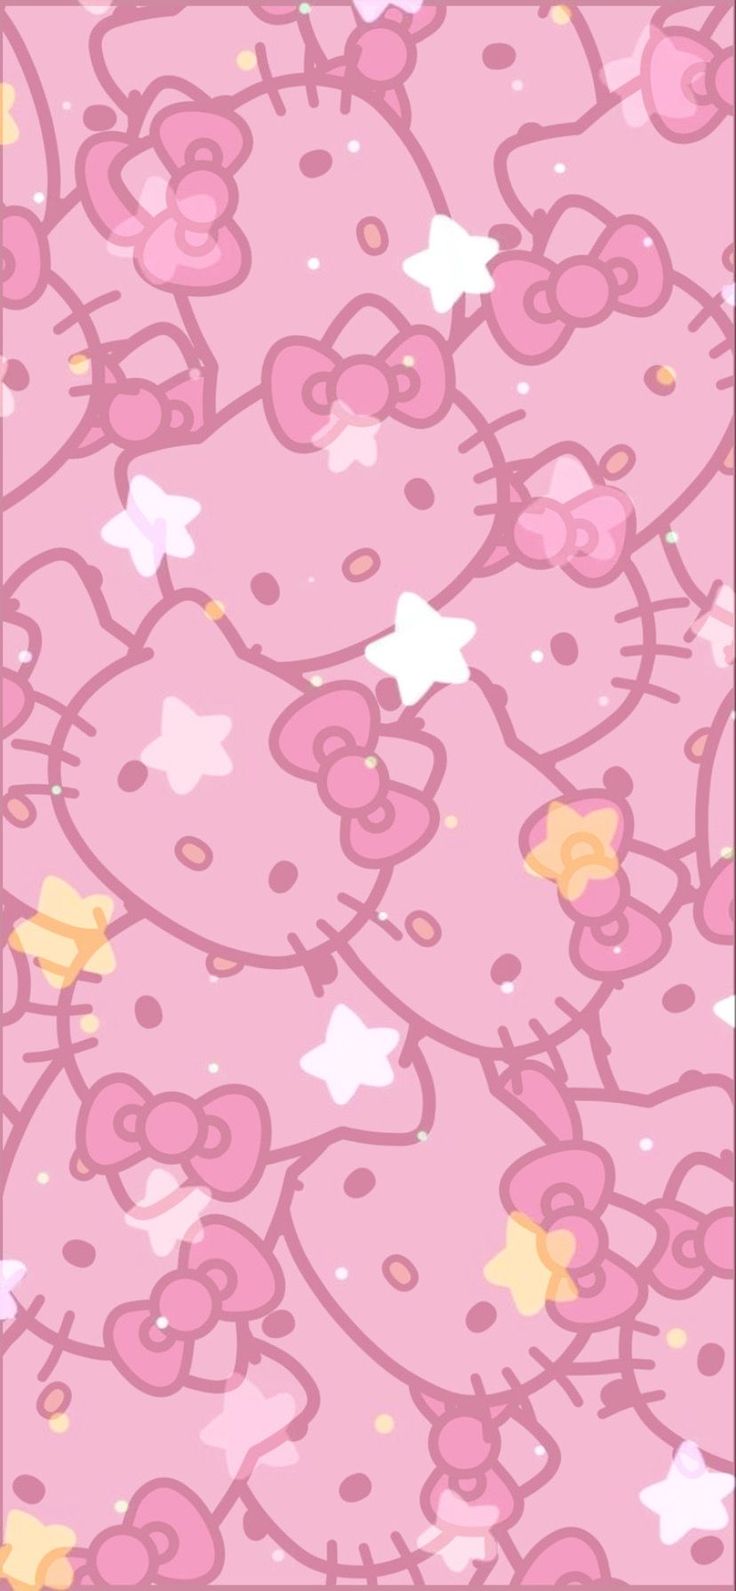 the hello kitty wallpaper is pink with stars and hearts on it's side